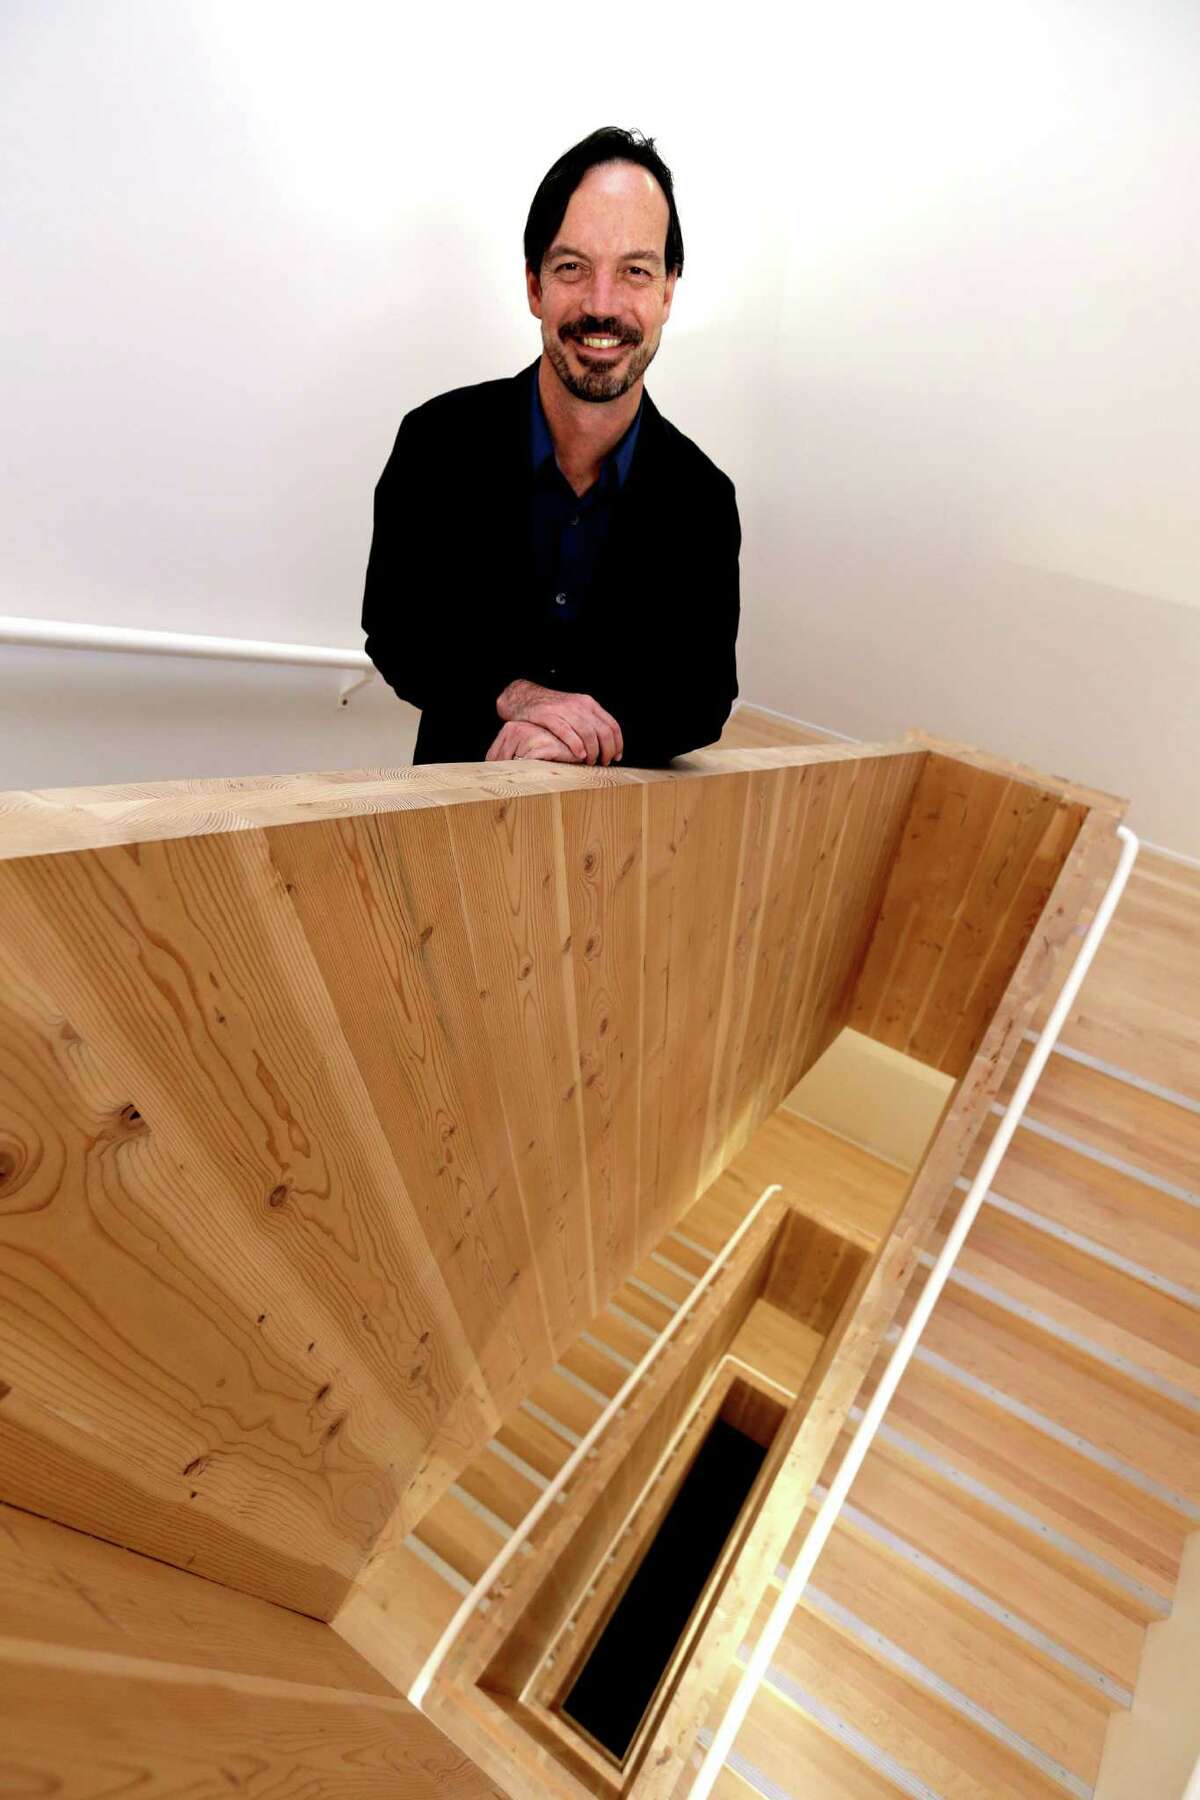 In this Nov. 15, 2016, photo, Lever Architecture founder Thomas Robinson poses for a photo in his company's all-wood headquarters building, built with cross-laminated timber, or CLT, in Portland, Ore. Lever Architecture is about to break ground on a 12-story all-wood building, using CLT, in Portland's Pearl District that the company says will be the tallest all-wood building in the world in a seismic zone and the tallest all-wood building in North America. (AP Photo/Don Ryan)